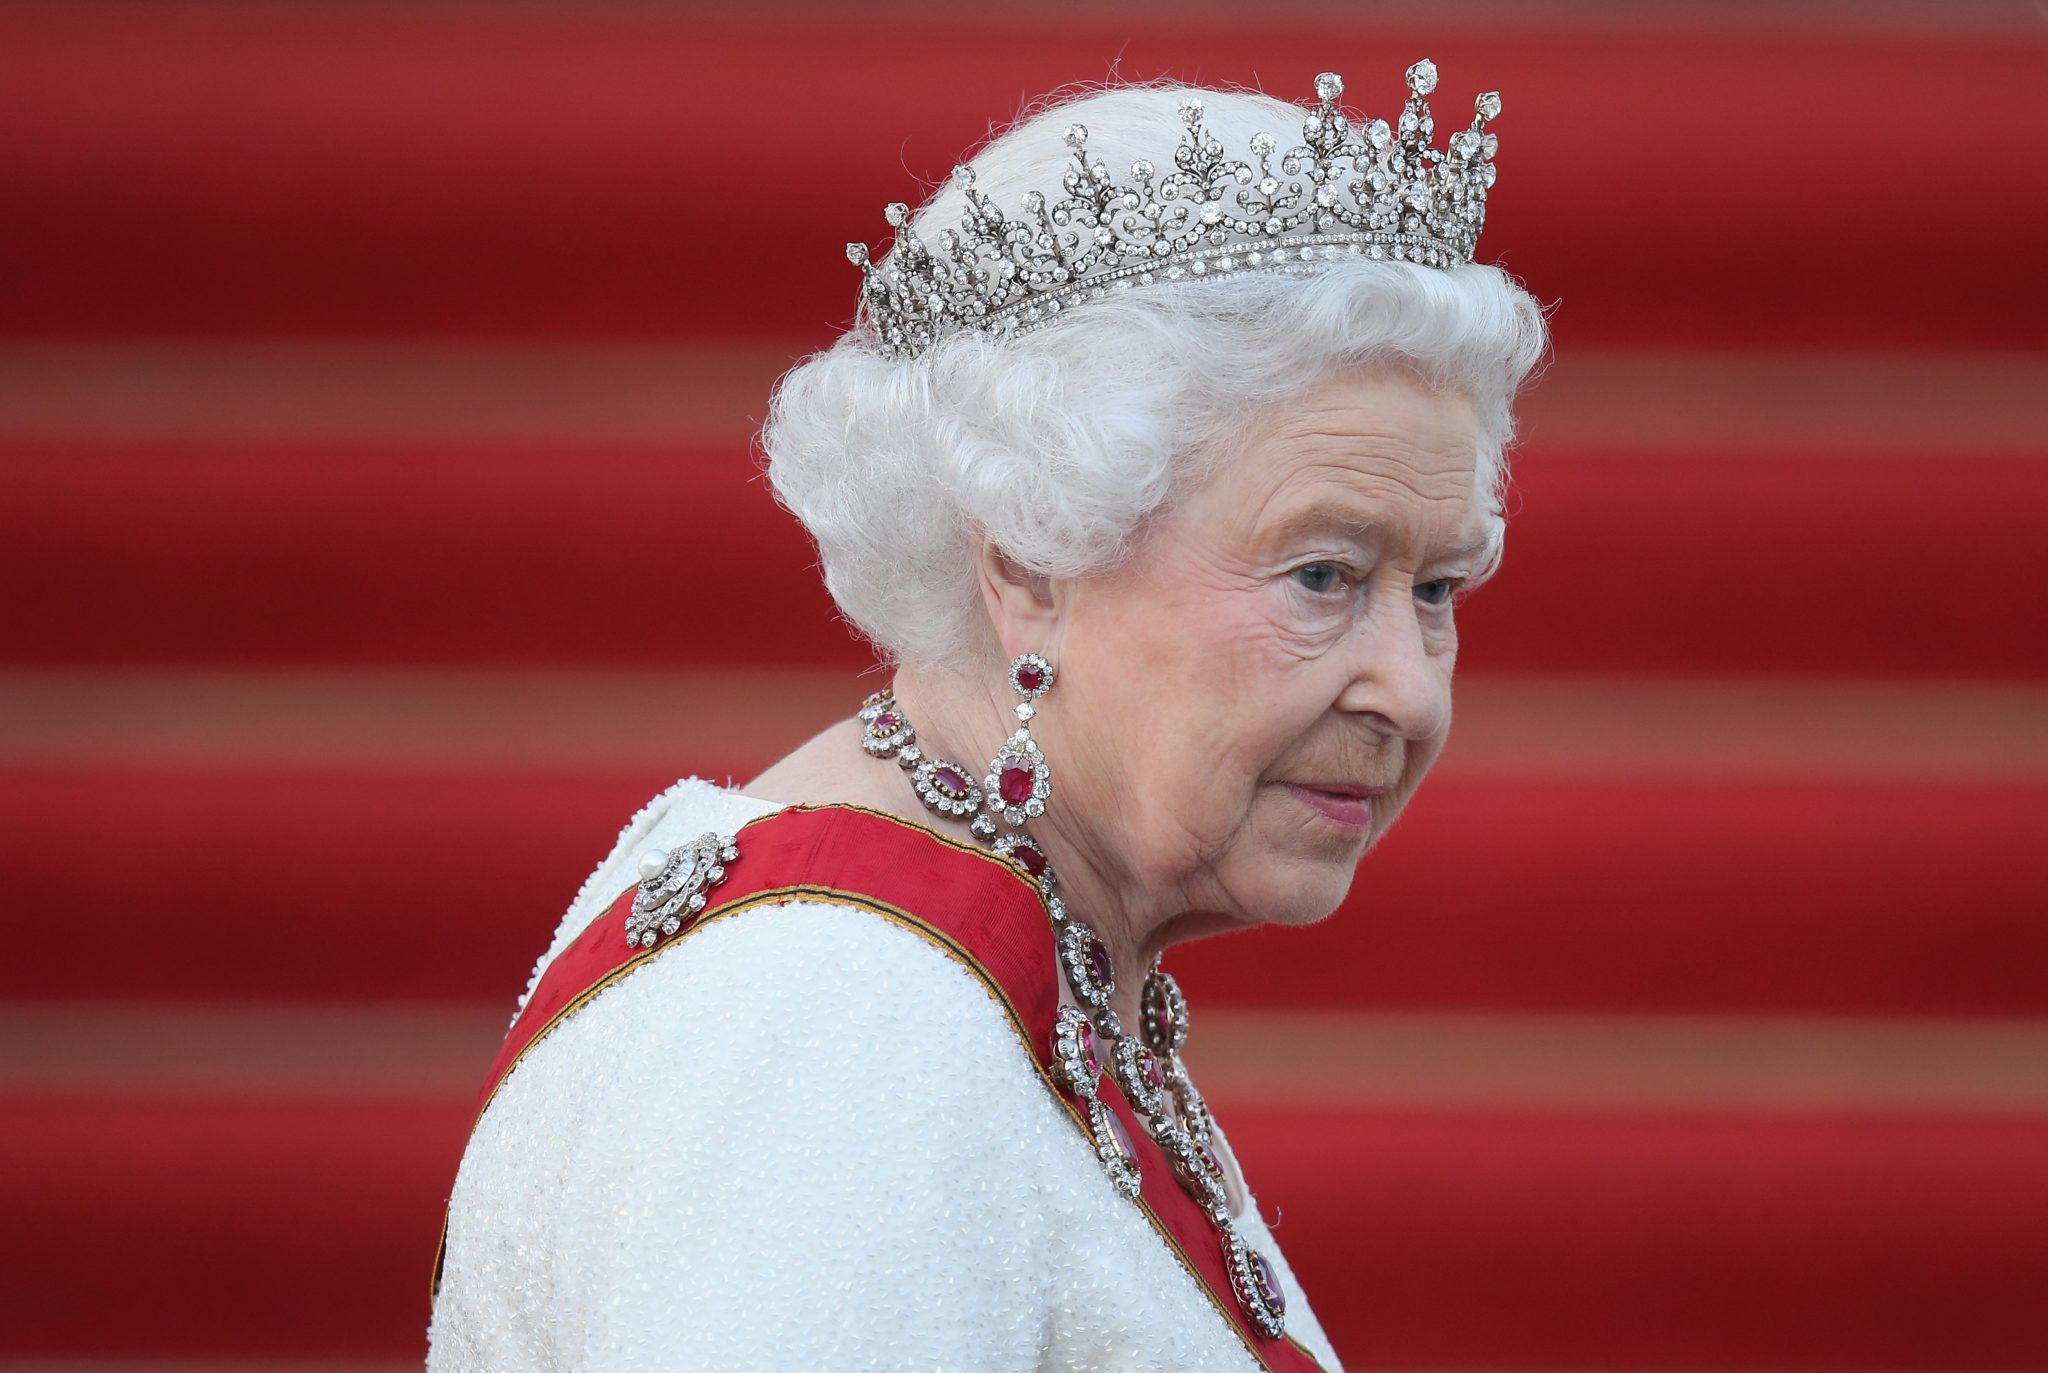 Queen Elizabeth II with a crown on